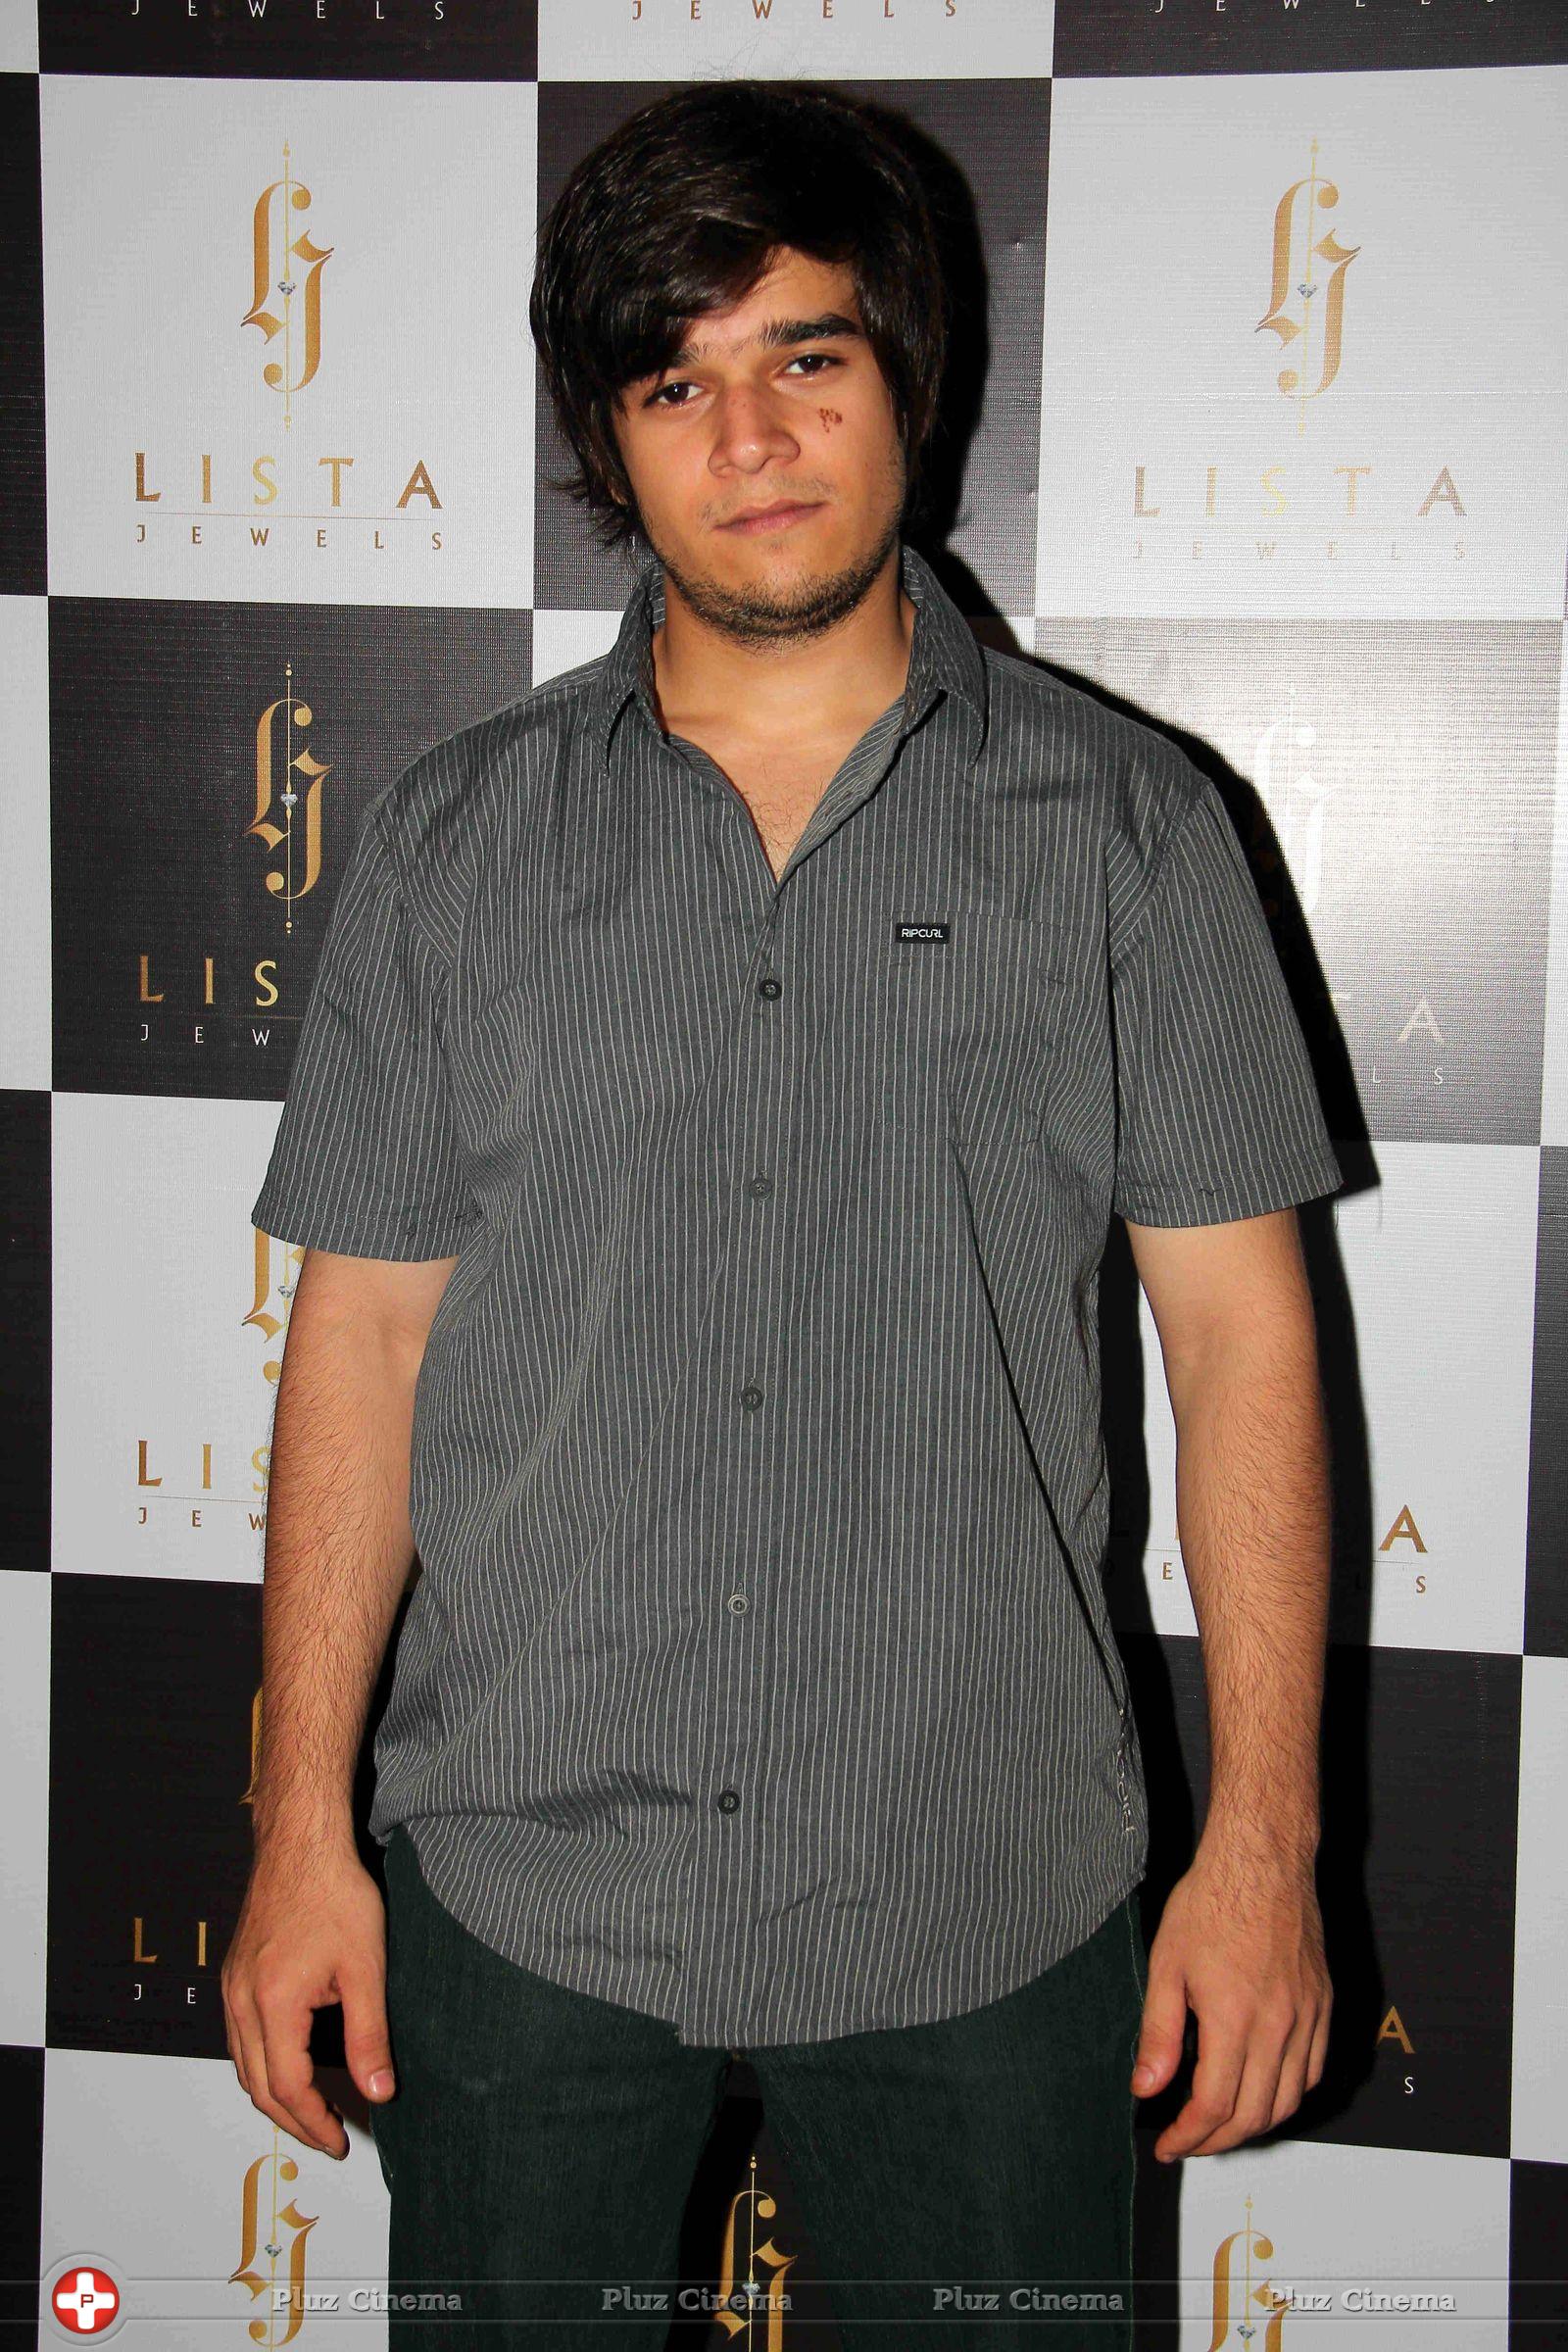 Vivaan Shah - Shahrukh Khan & Others at The Launch of Lista Jewellery Store Photos | Picture 622863